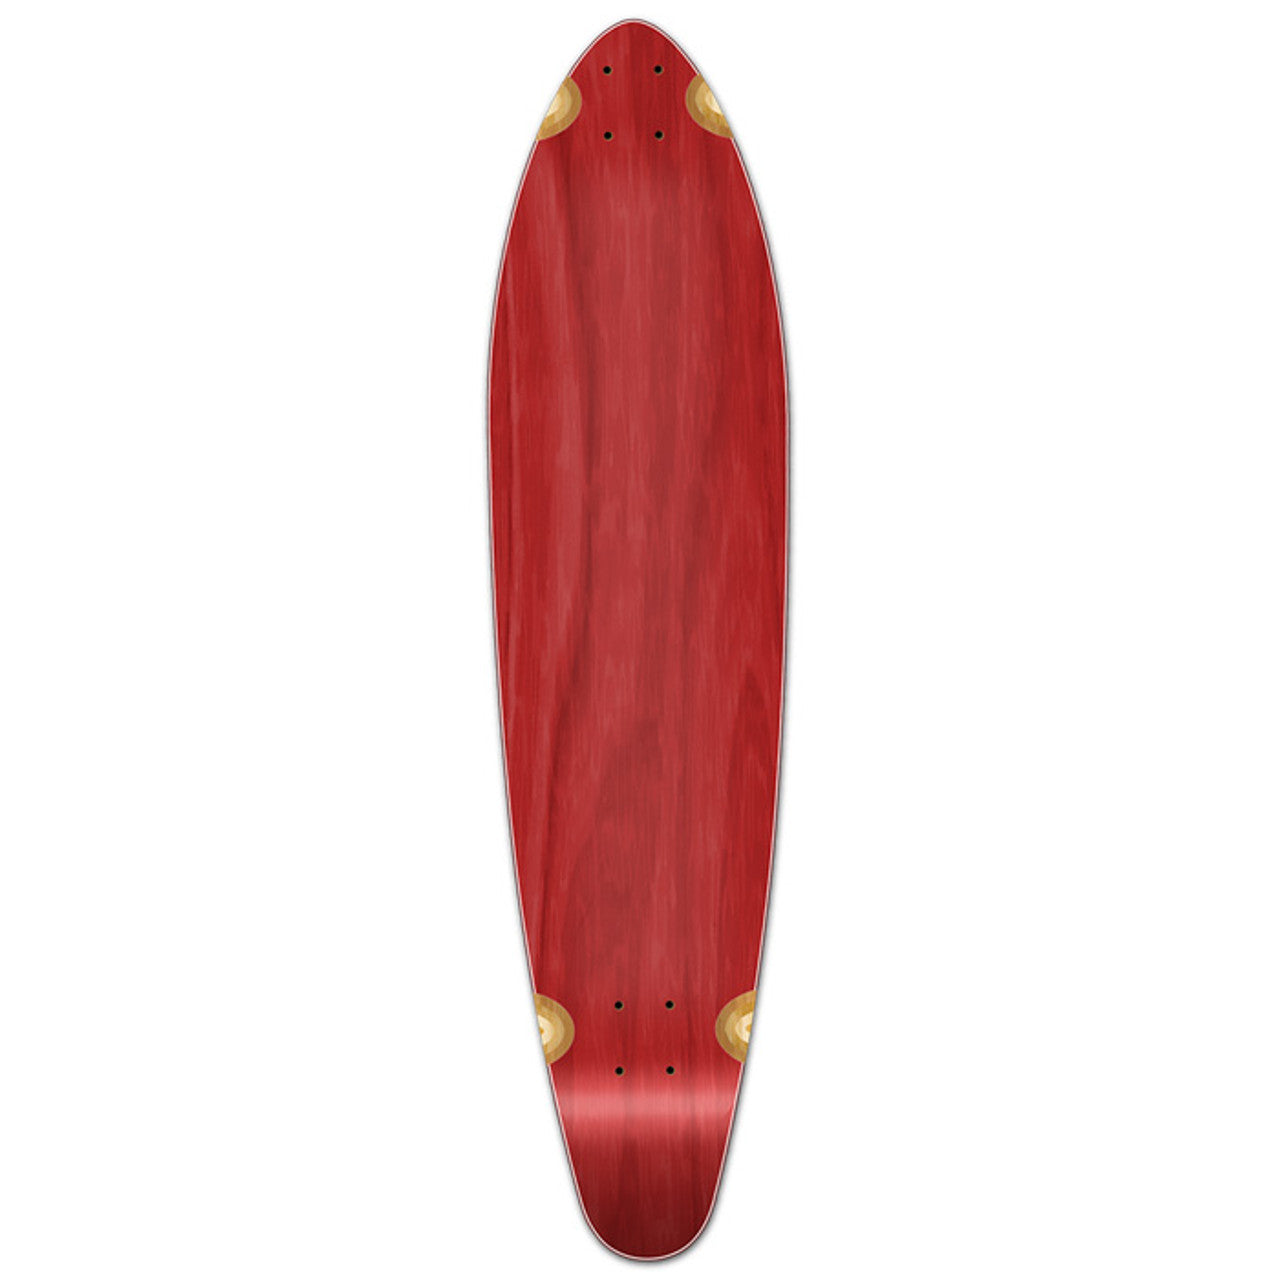 Yocaher Kicktail Longboard Deck - Stained Red